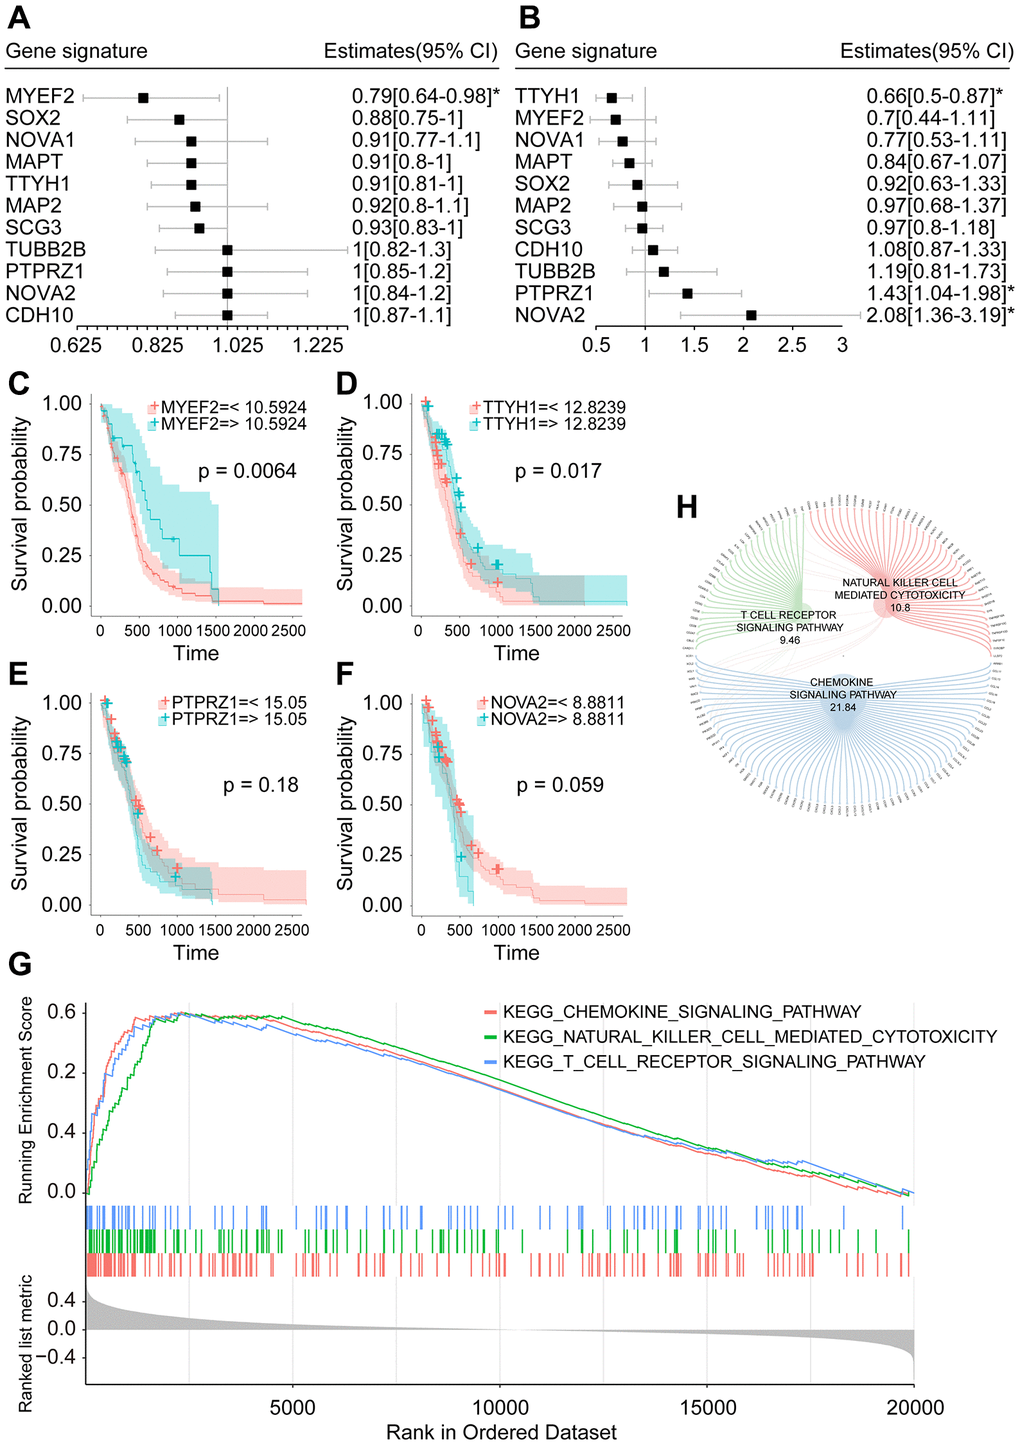 Prognostic analysis of hub genes. (A) Forest plot of univariate Cox analysis of hub genes. (B) Forest plot of multivariate Cox analysis of hub genes. (C) Overall survival analysis of MYEF2. (D) Overall survival analysis of TTYH1. (E) Overall survival analysis of PTPRZ1. (F) Overall survival analysis of NOVA2. (G) Plot of the top three enriched pathways in GSEA analysis of MYEF2. (H) Circle diagram of core genes in the top three enriched pathways in GSEA analysis of MYEF2. Larger circle corresponding to each gene represents larger rank metric score value.